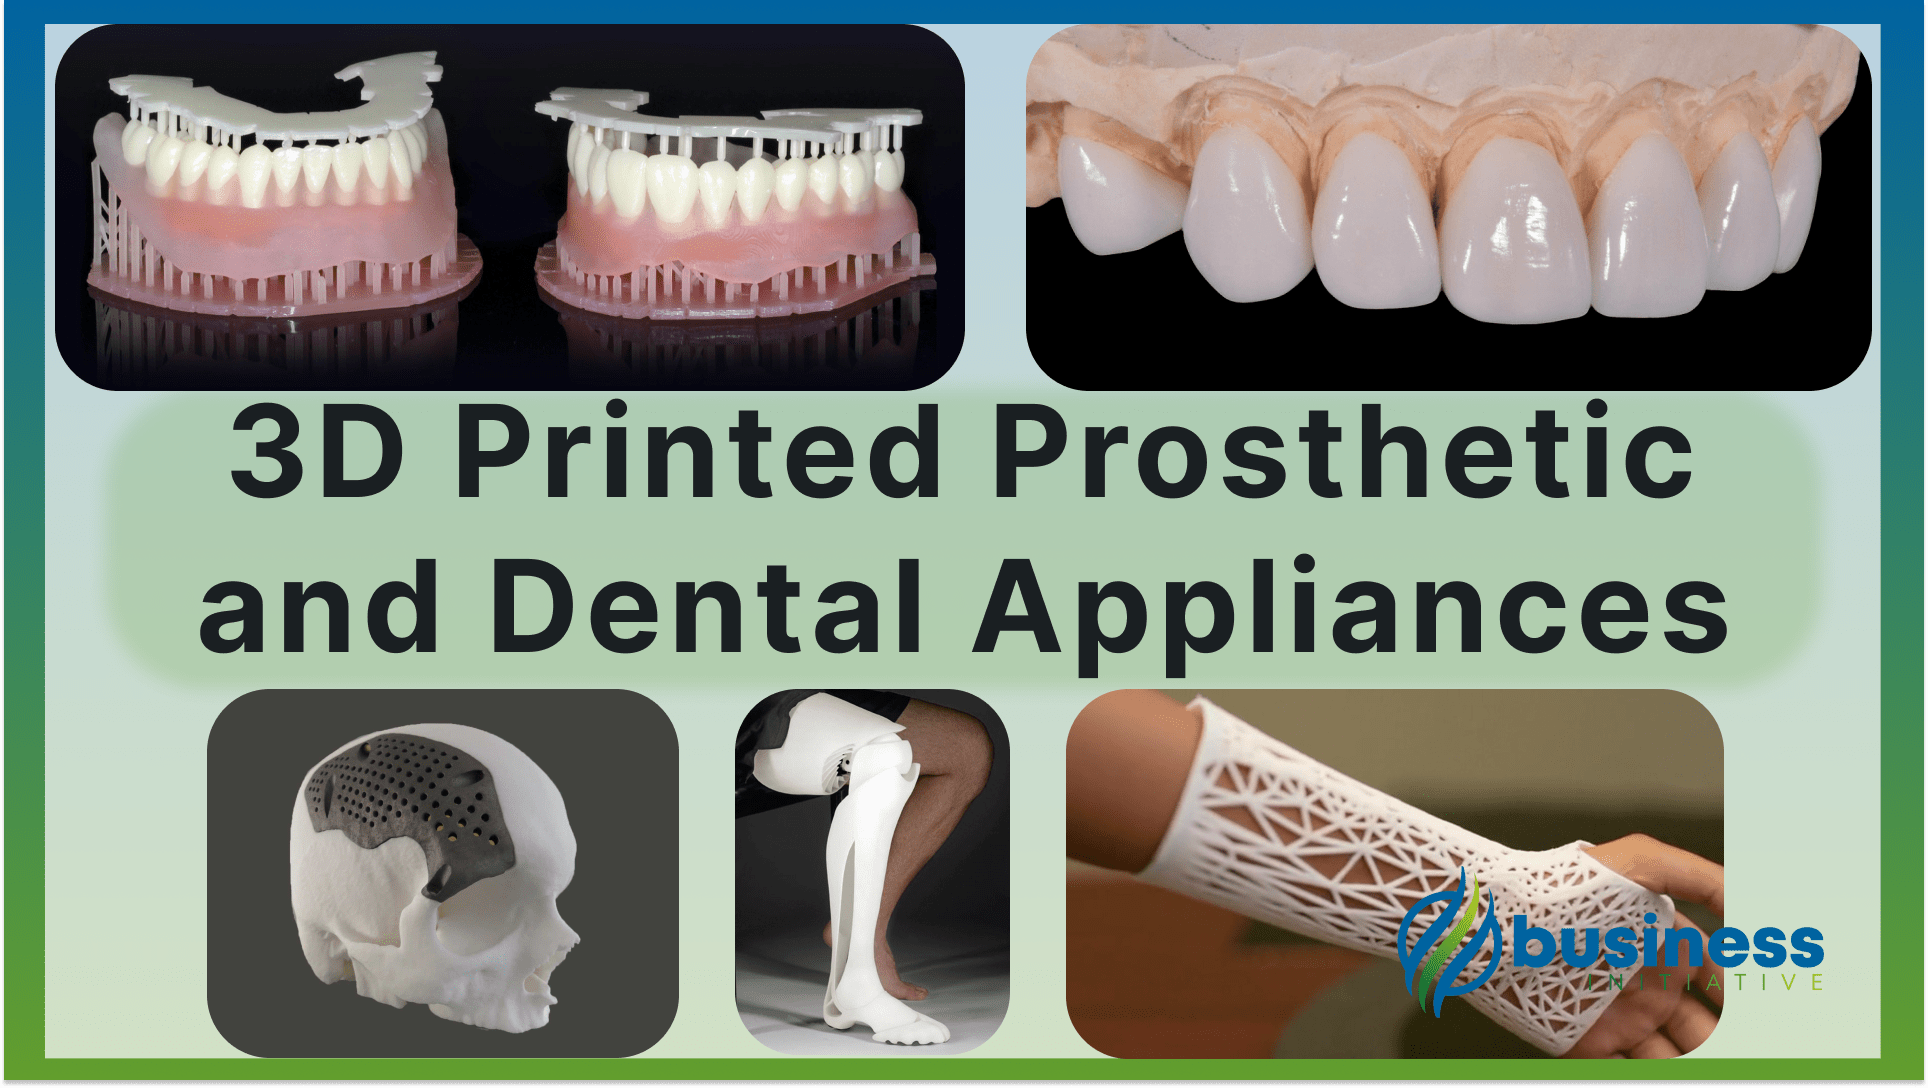 3d printed prosthesis and dental